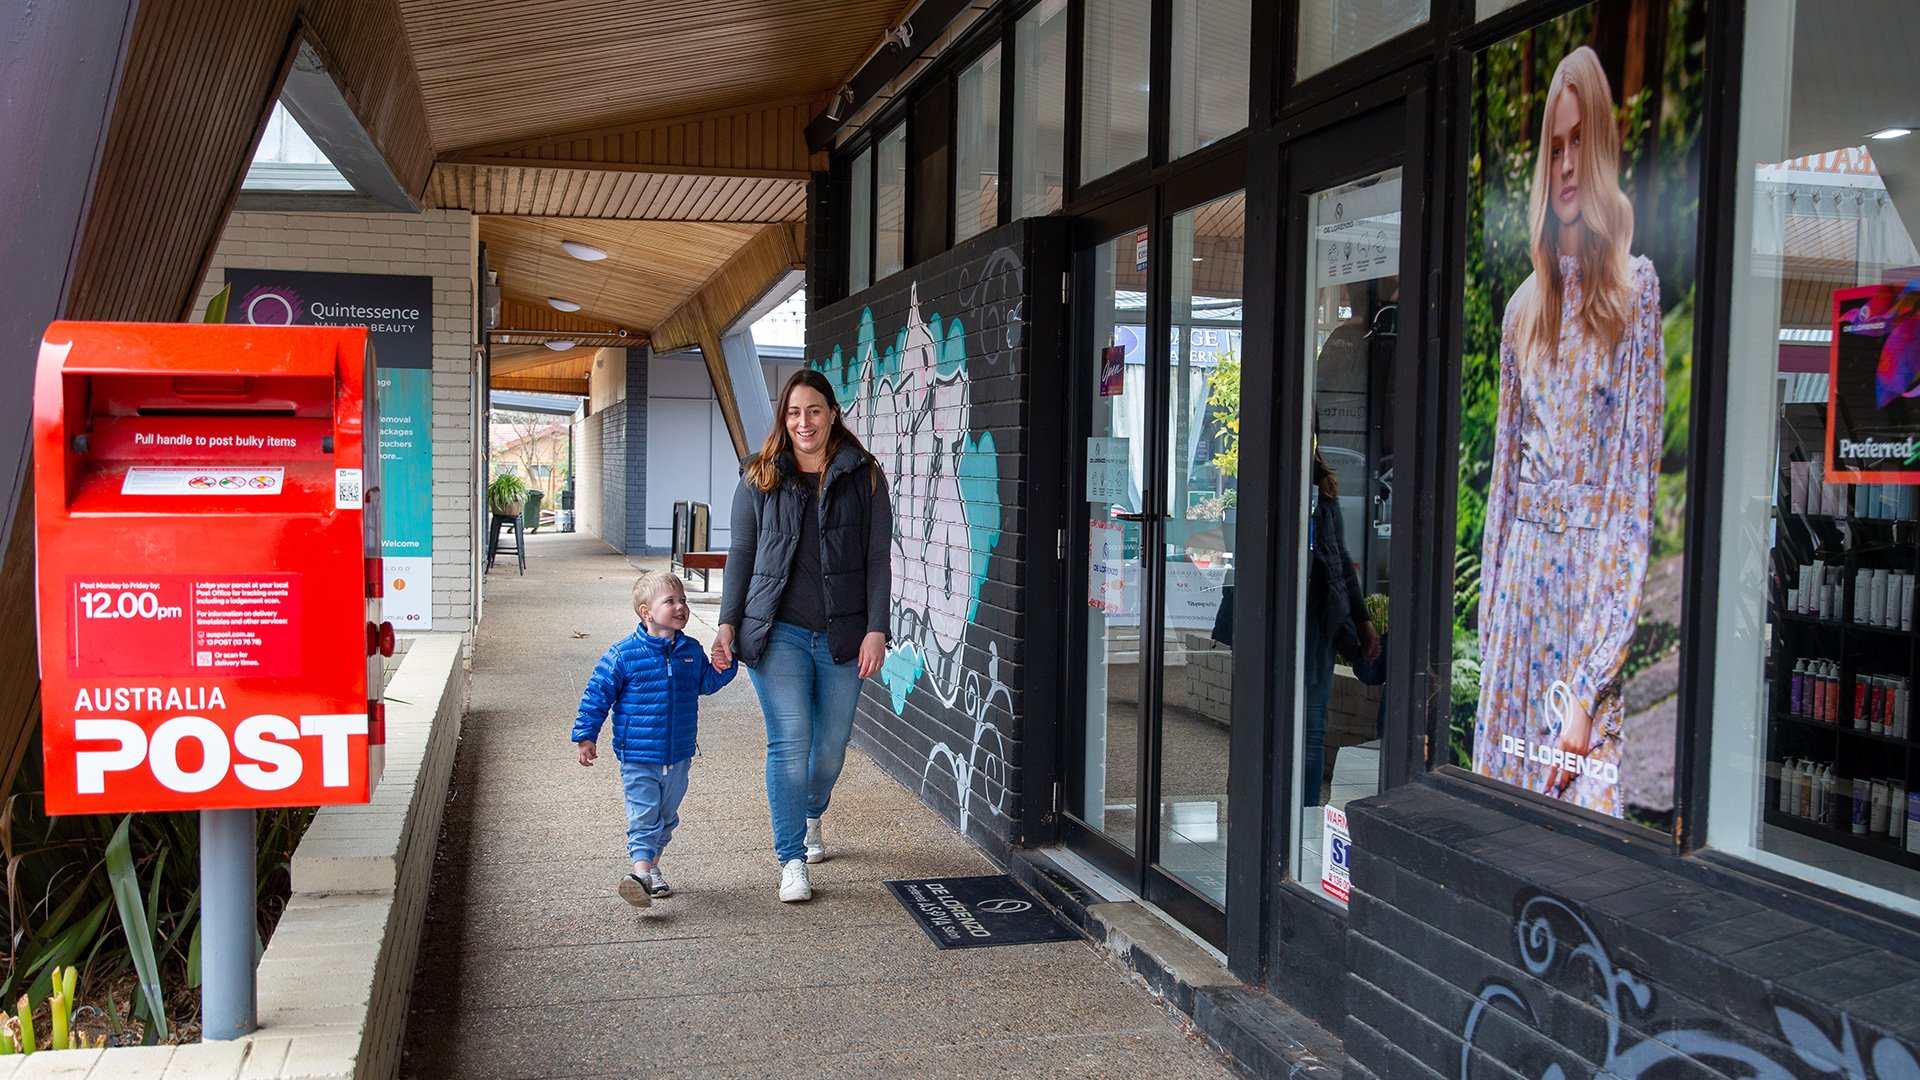 A woman and young child walk along a local shopping area. There is an Australia Post box beside them.